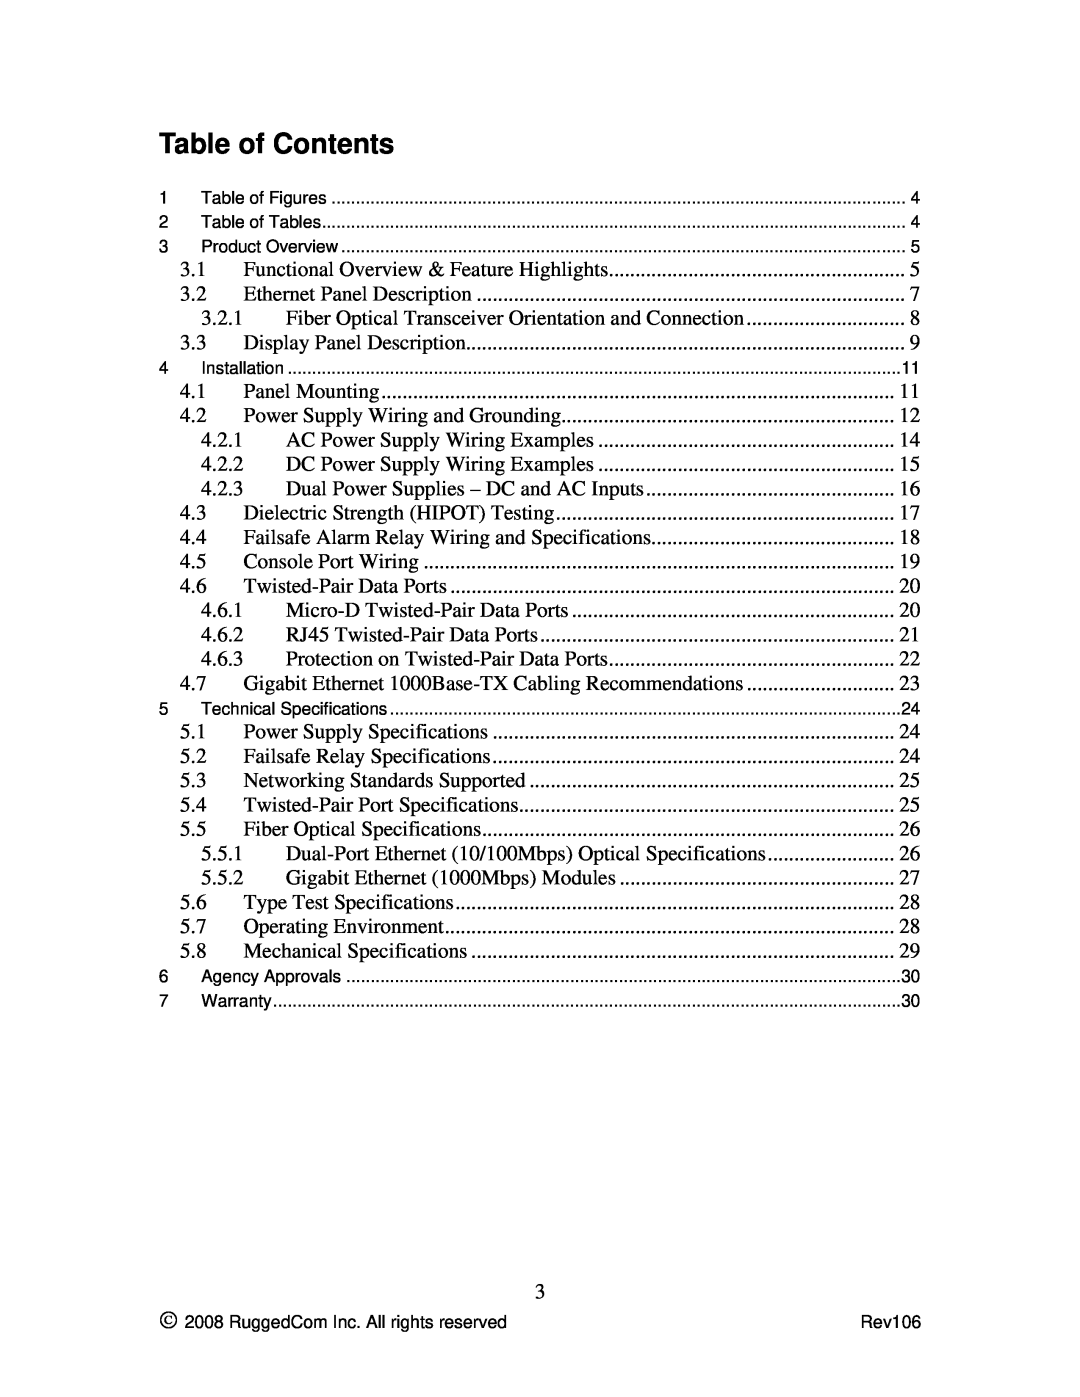 RuggedCom M2100 manual Table of Contents 